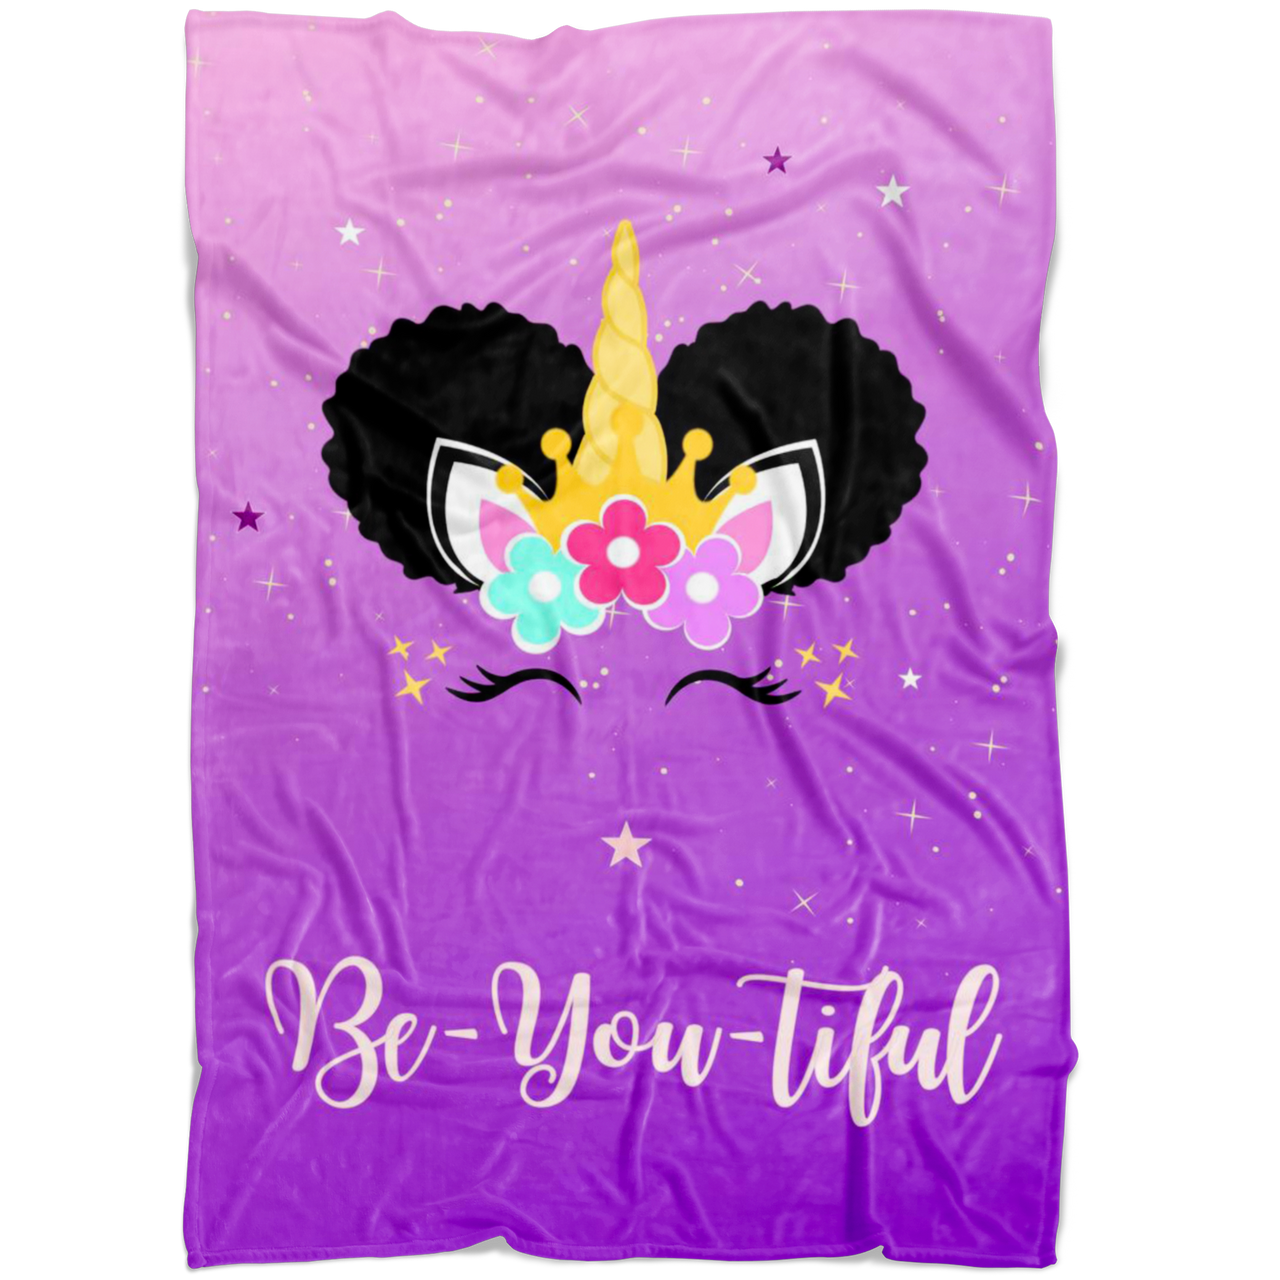 The Be-YOU-tiful Afro Puffs Unicorn Blanket - Pink/Purple